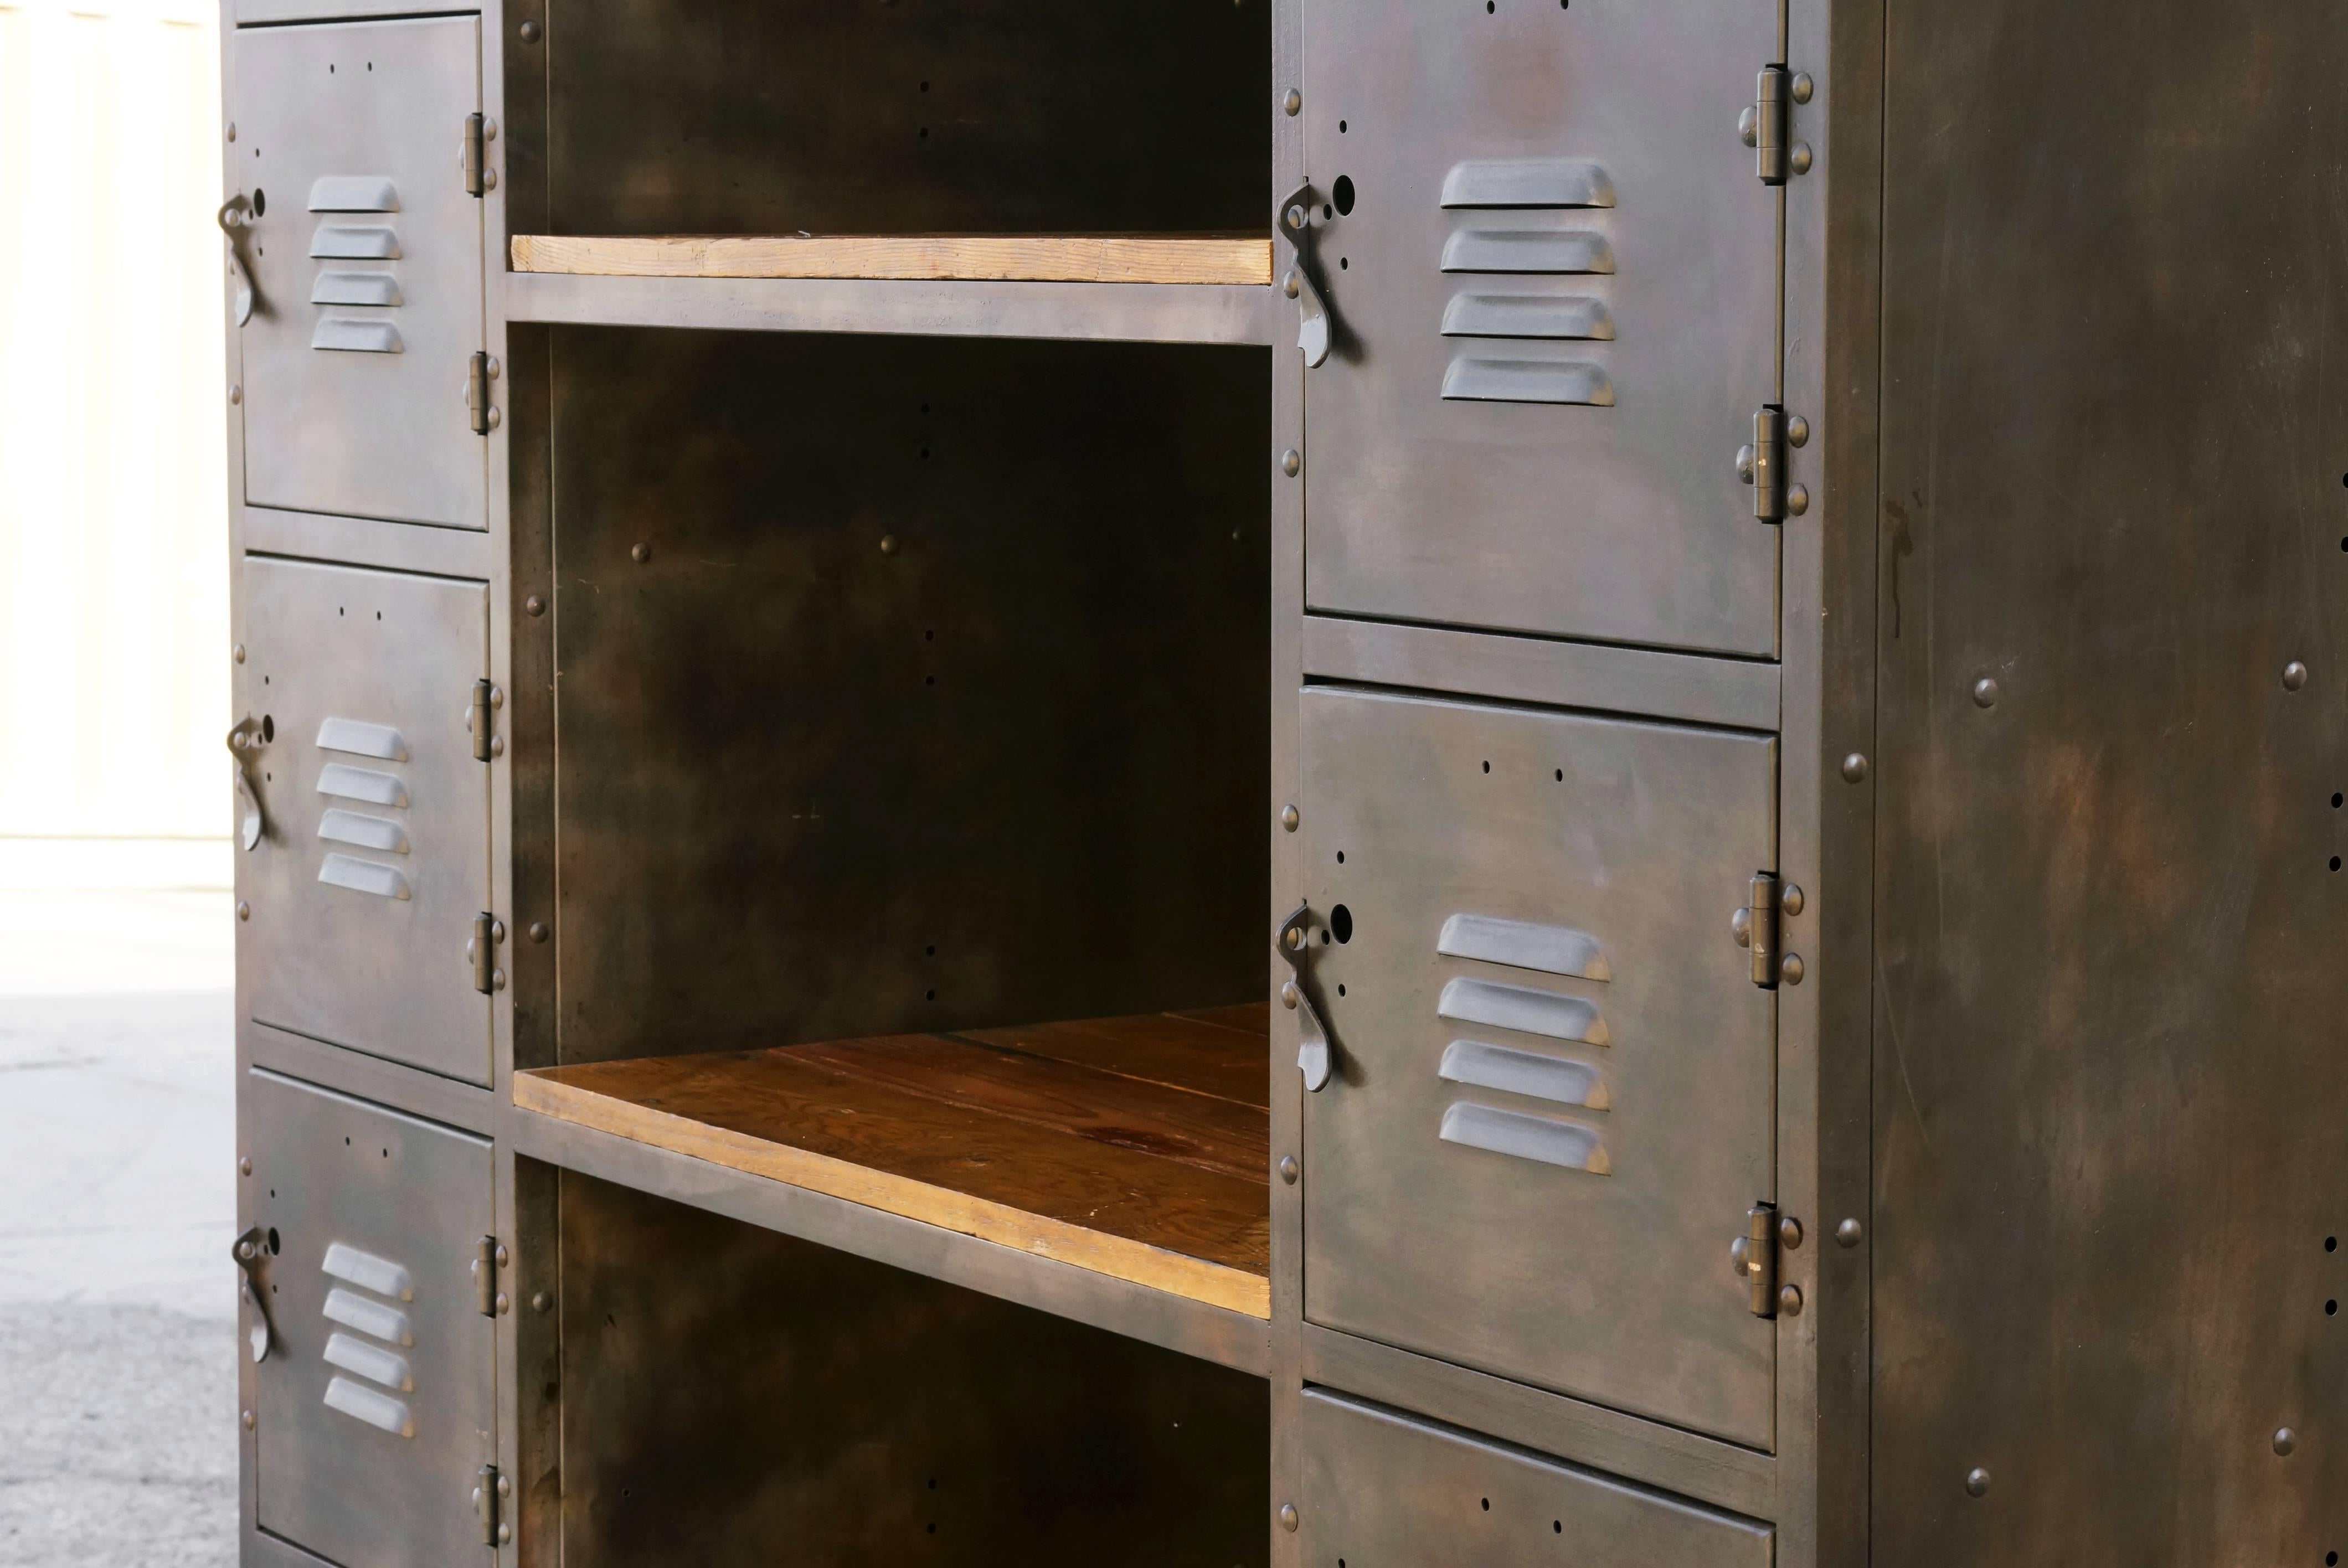 Absolutely gorgeous two column cubby locker and shelf unit. Our custom unit features an acid etched steel patina and reclaimed barn wood. Built with 12 lockable cubbies and four shelves. Rolls on casters. 

This multifunctional piece is a great